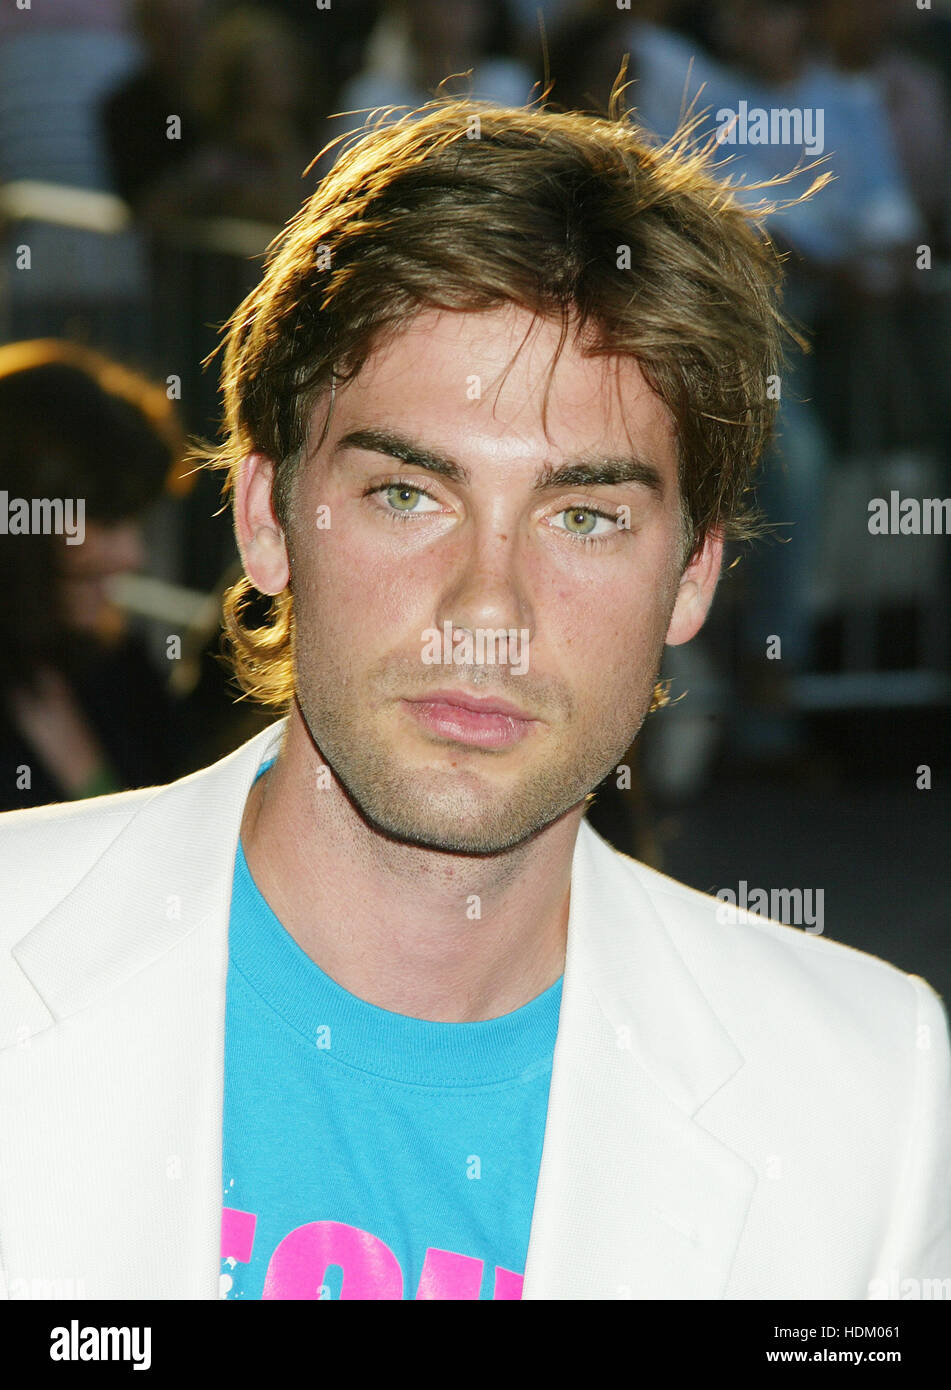 Actor Drew Fuller at the premiere for the film, 'We Don't Live Here Anymore', on August 5, 2004  Photo credit: Francis Specker Stock Photo